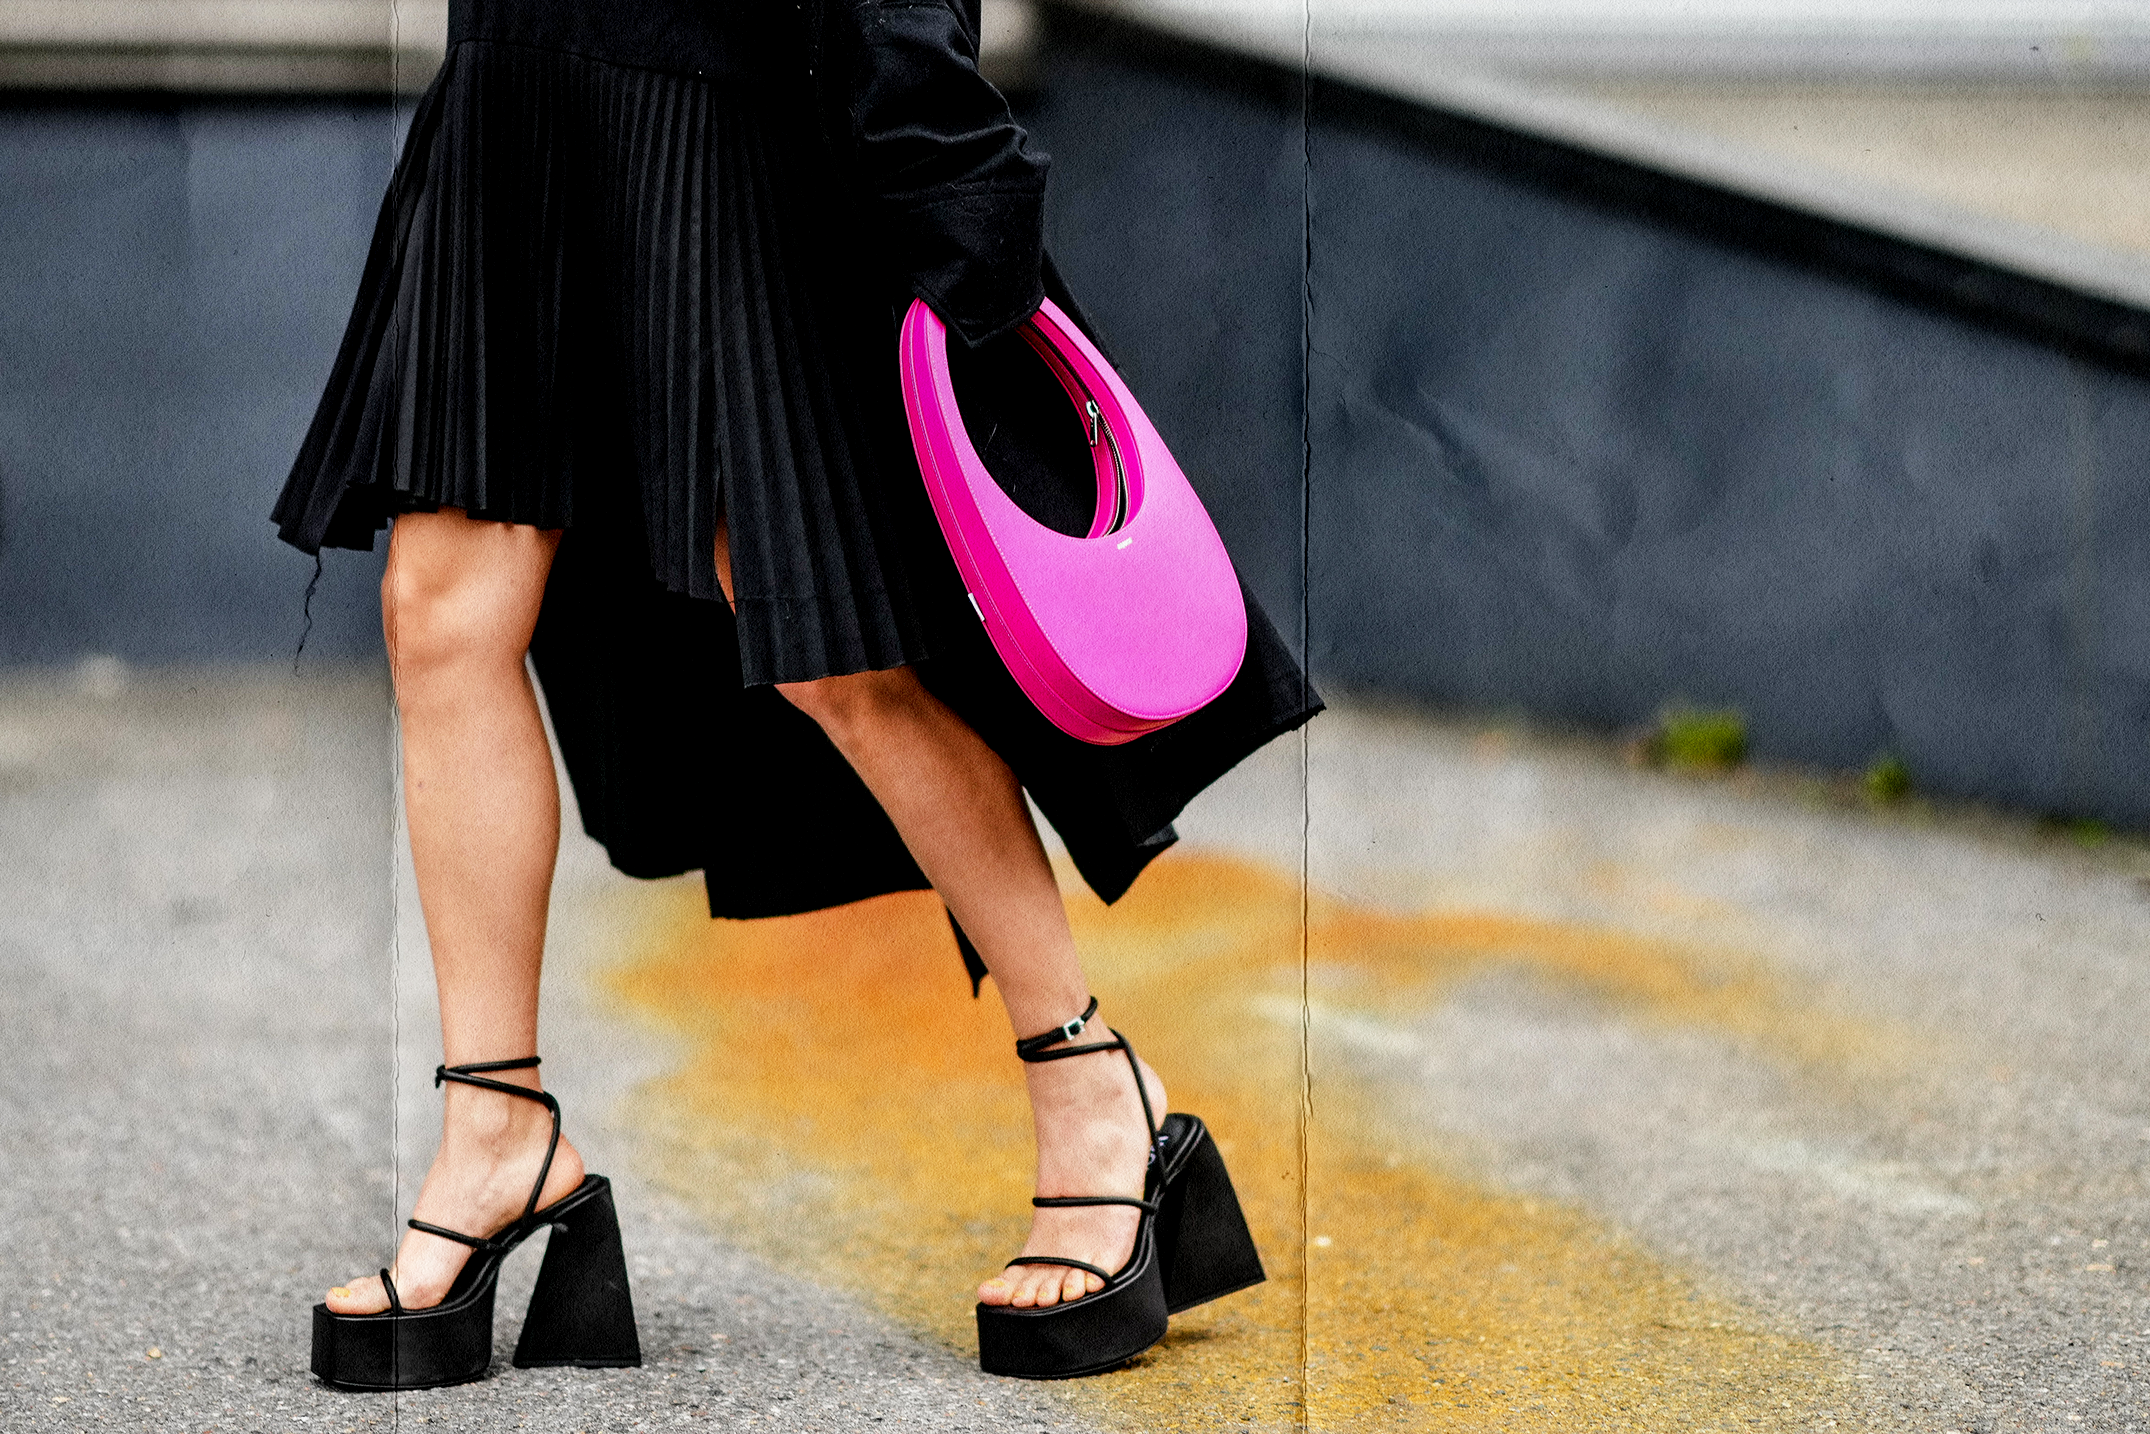 Why everybody needs a pair of platform sandals when they feel low